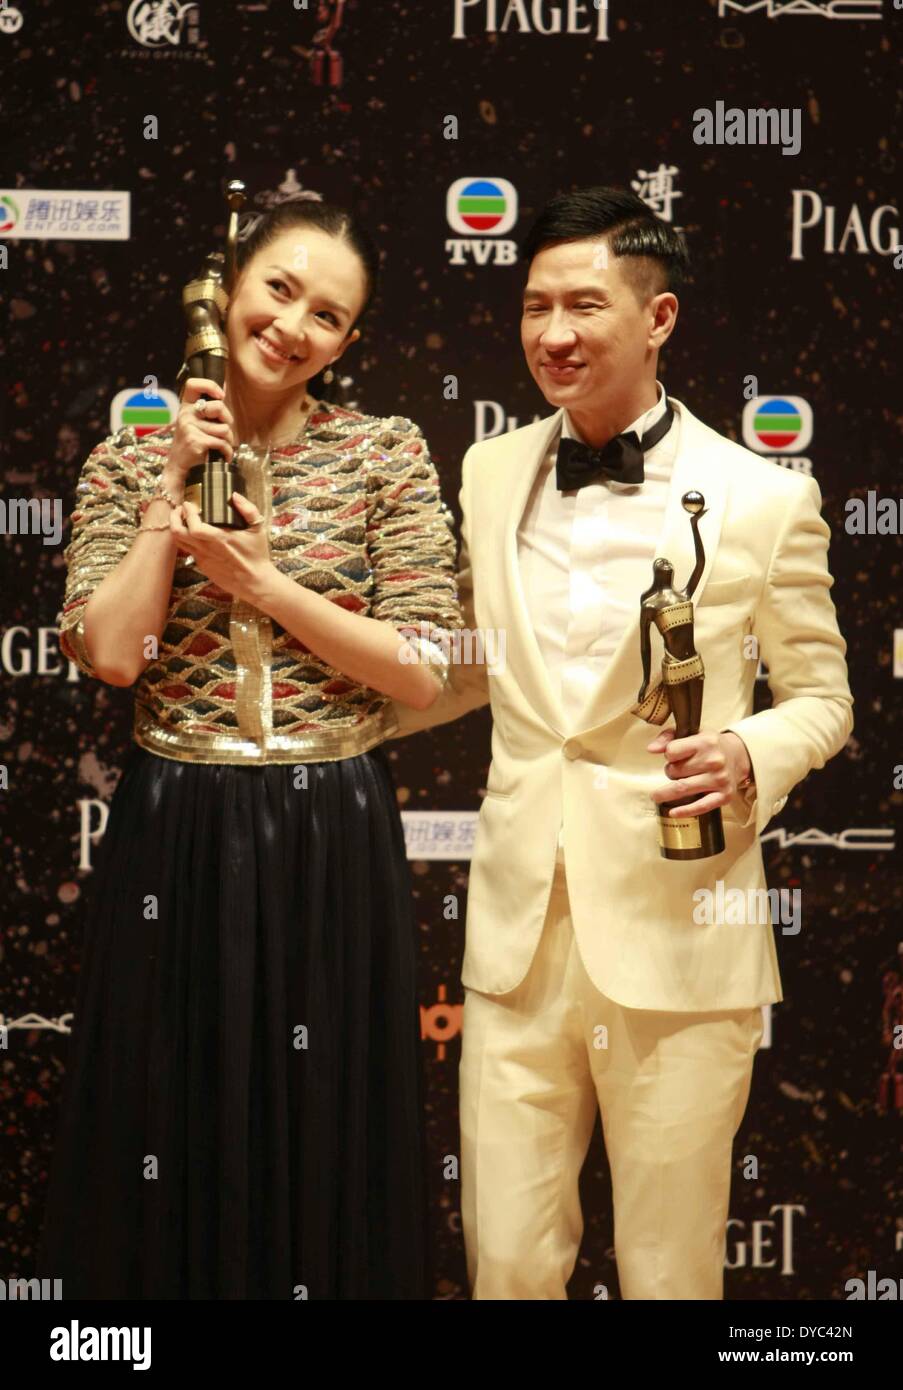 Hong Kong, China. 13th Apr, 2014. Zhang Ziyi (L), winner of the Best Actress award for her performance in the movie 'The Grandmaster', and Nick Cheung, winner of the Best Actor award for his performance in the movie 'Unbeatable', show their trophies at the presentation ceremony of the 33rd Hong Kong Film Awards (HKFA) in Hong Kong, south China, April 13, 2014. © Cai Fangya/Xinhua/Alamy Live News Stock Photo